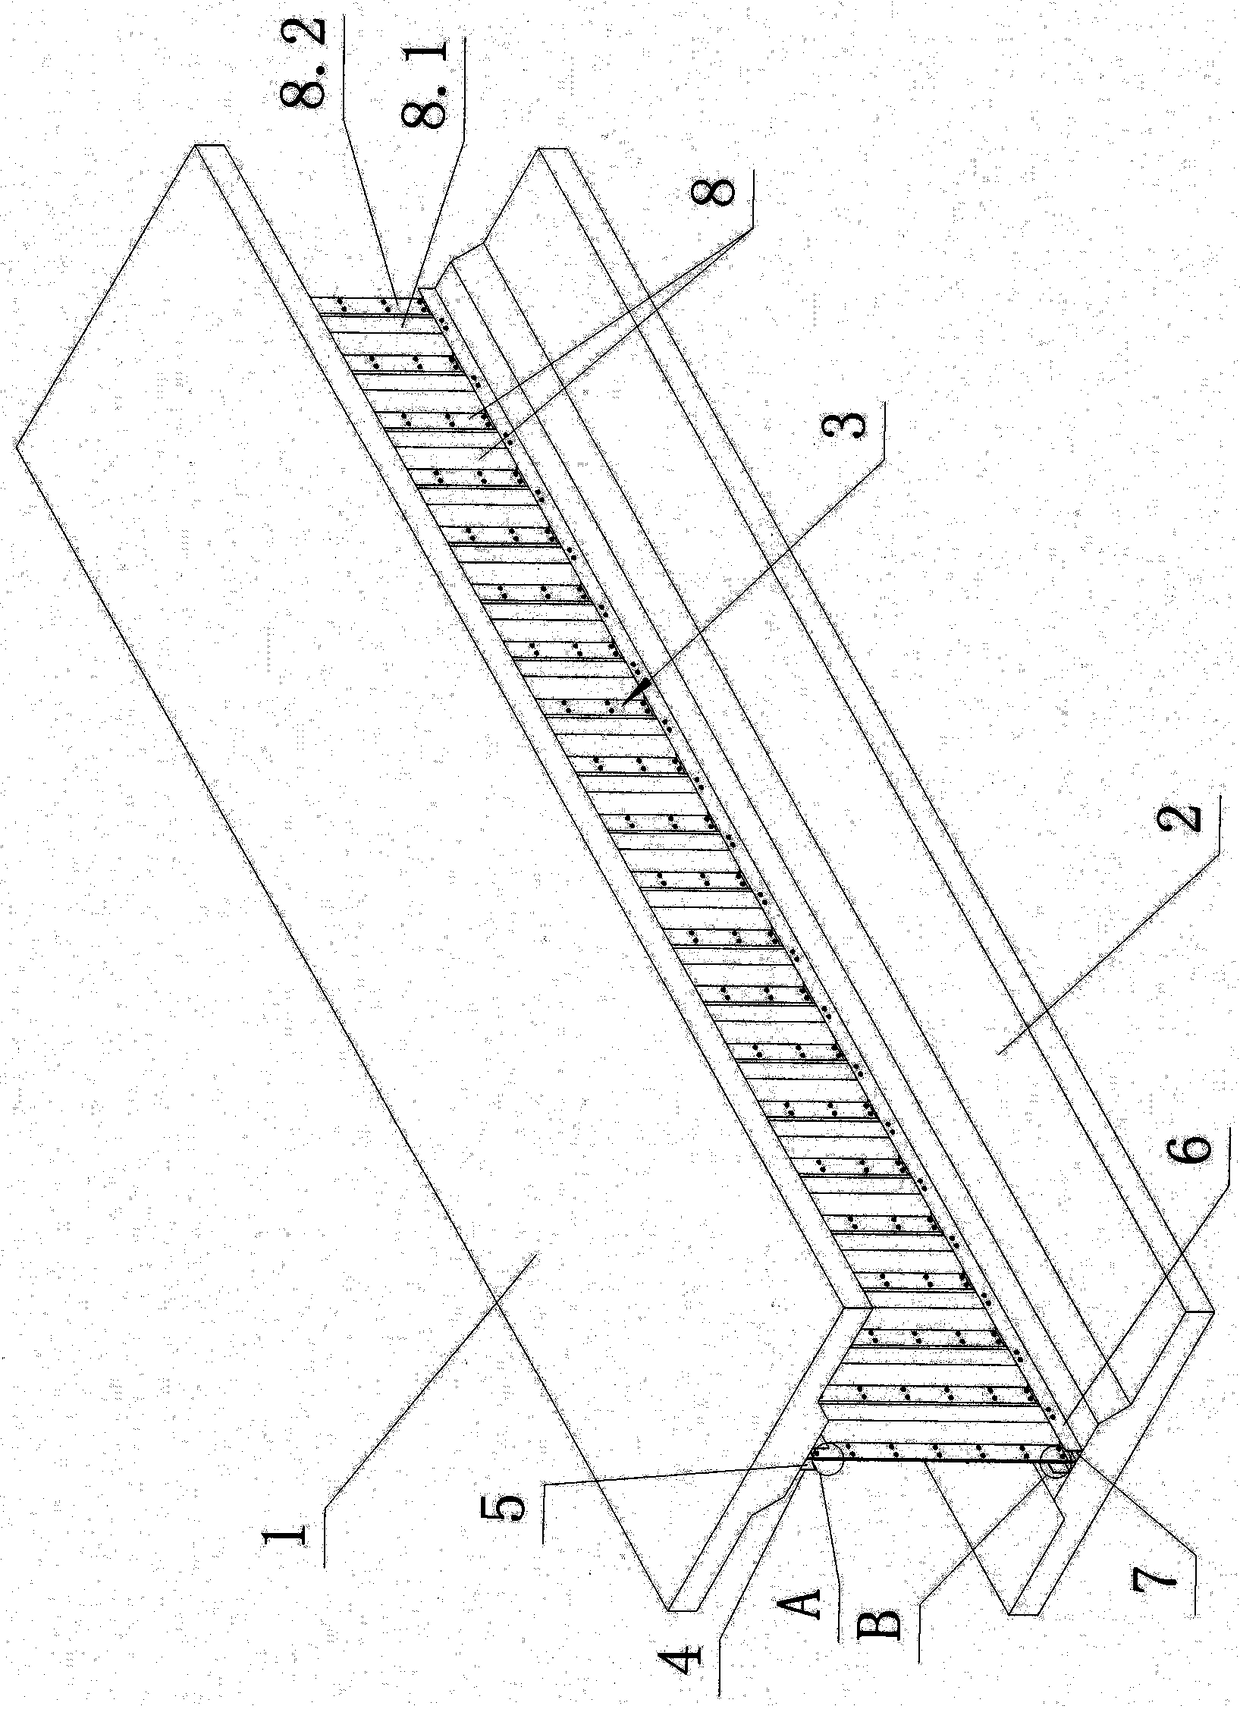 Corrugated plate type I-shaped structural beam and its construction method